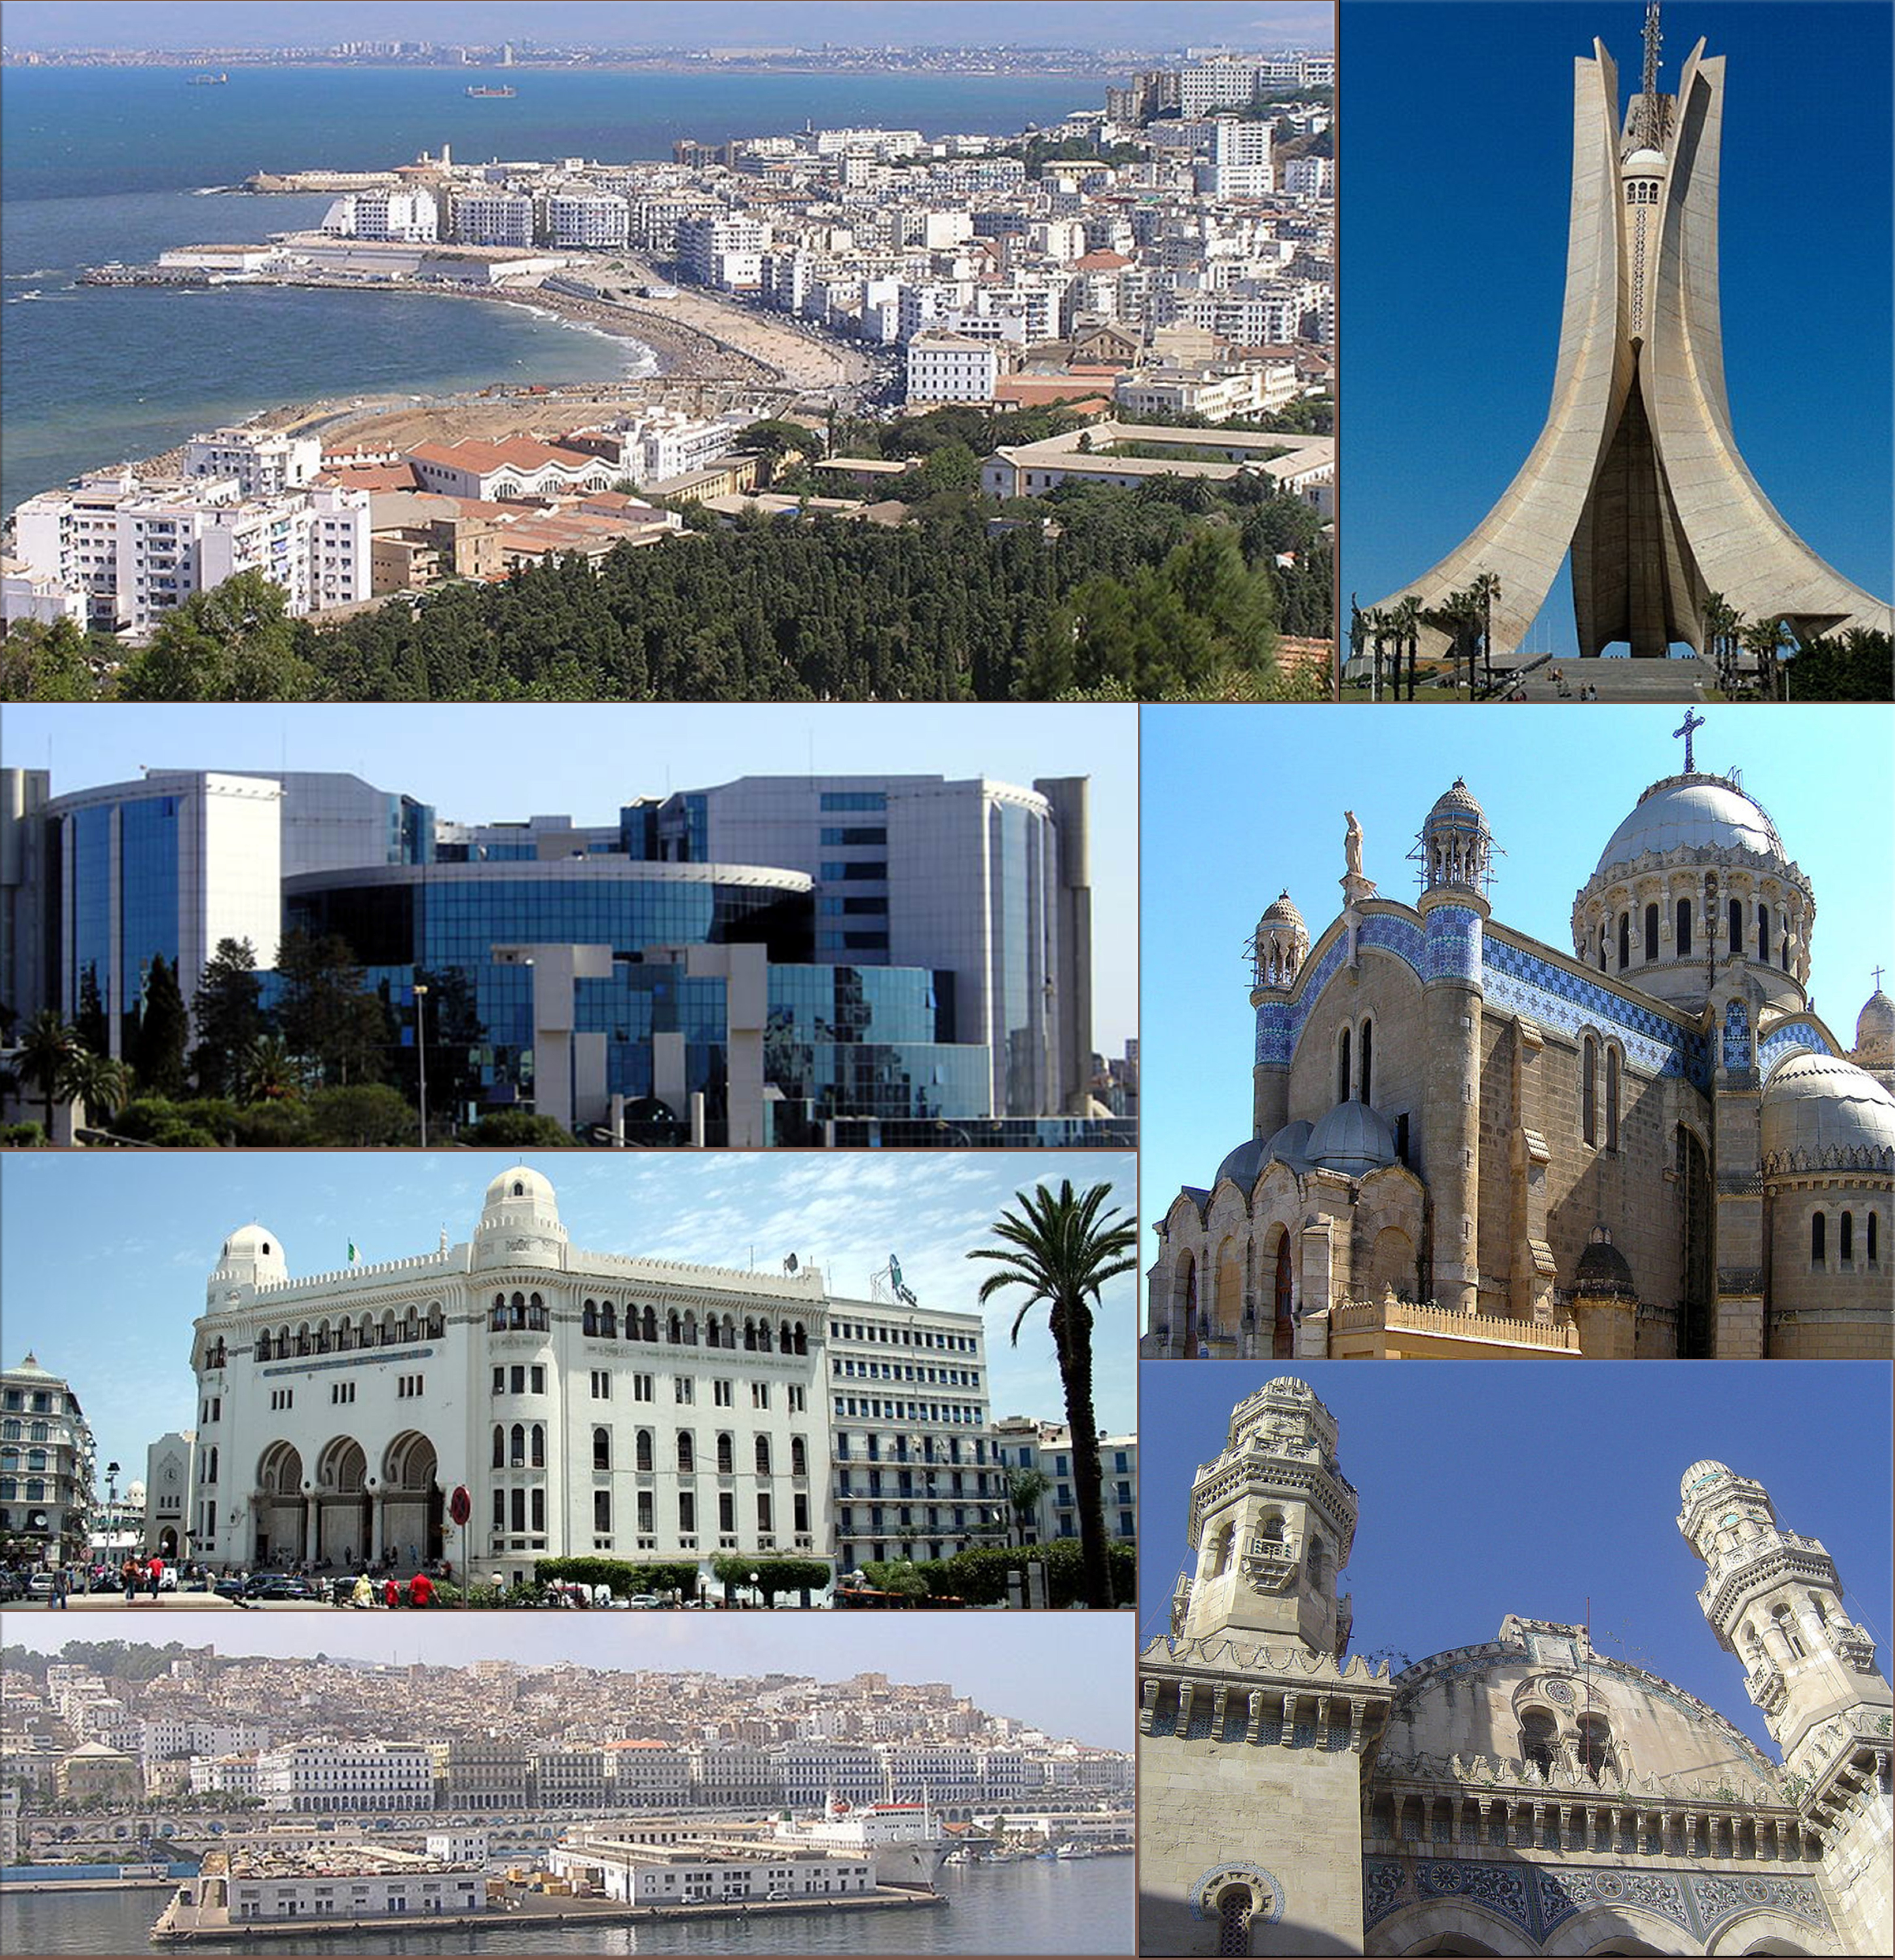 Buildings along the Mediterranean coast of Algiers, ● Martyrs Memorial, ● Notre Dame d'Afrique, ● Ketchaoua Mosque, ● Casbah, ● the Grand Post Office and ● the Ministry of Finance of Algeria